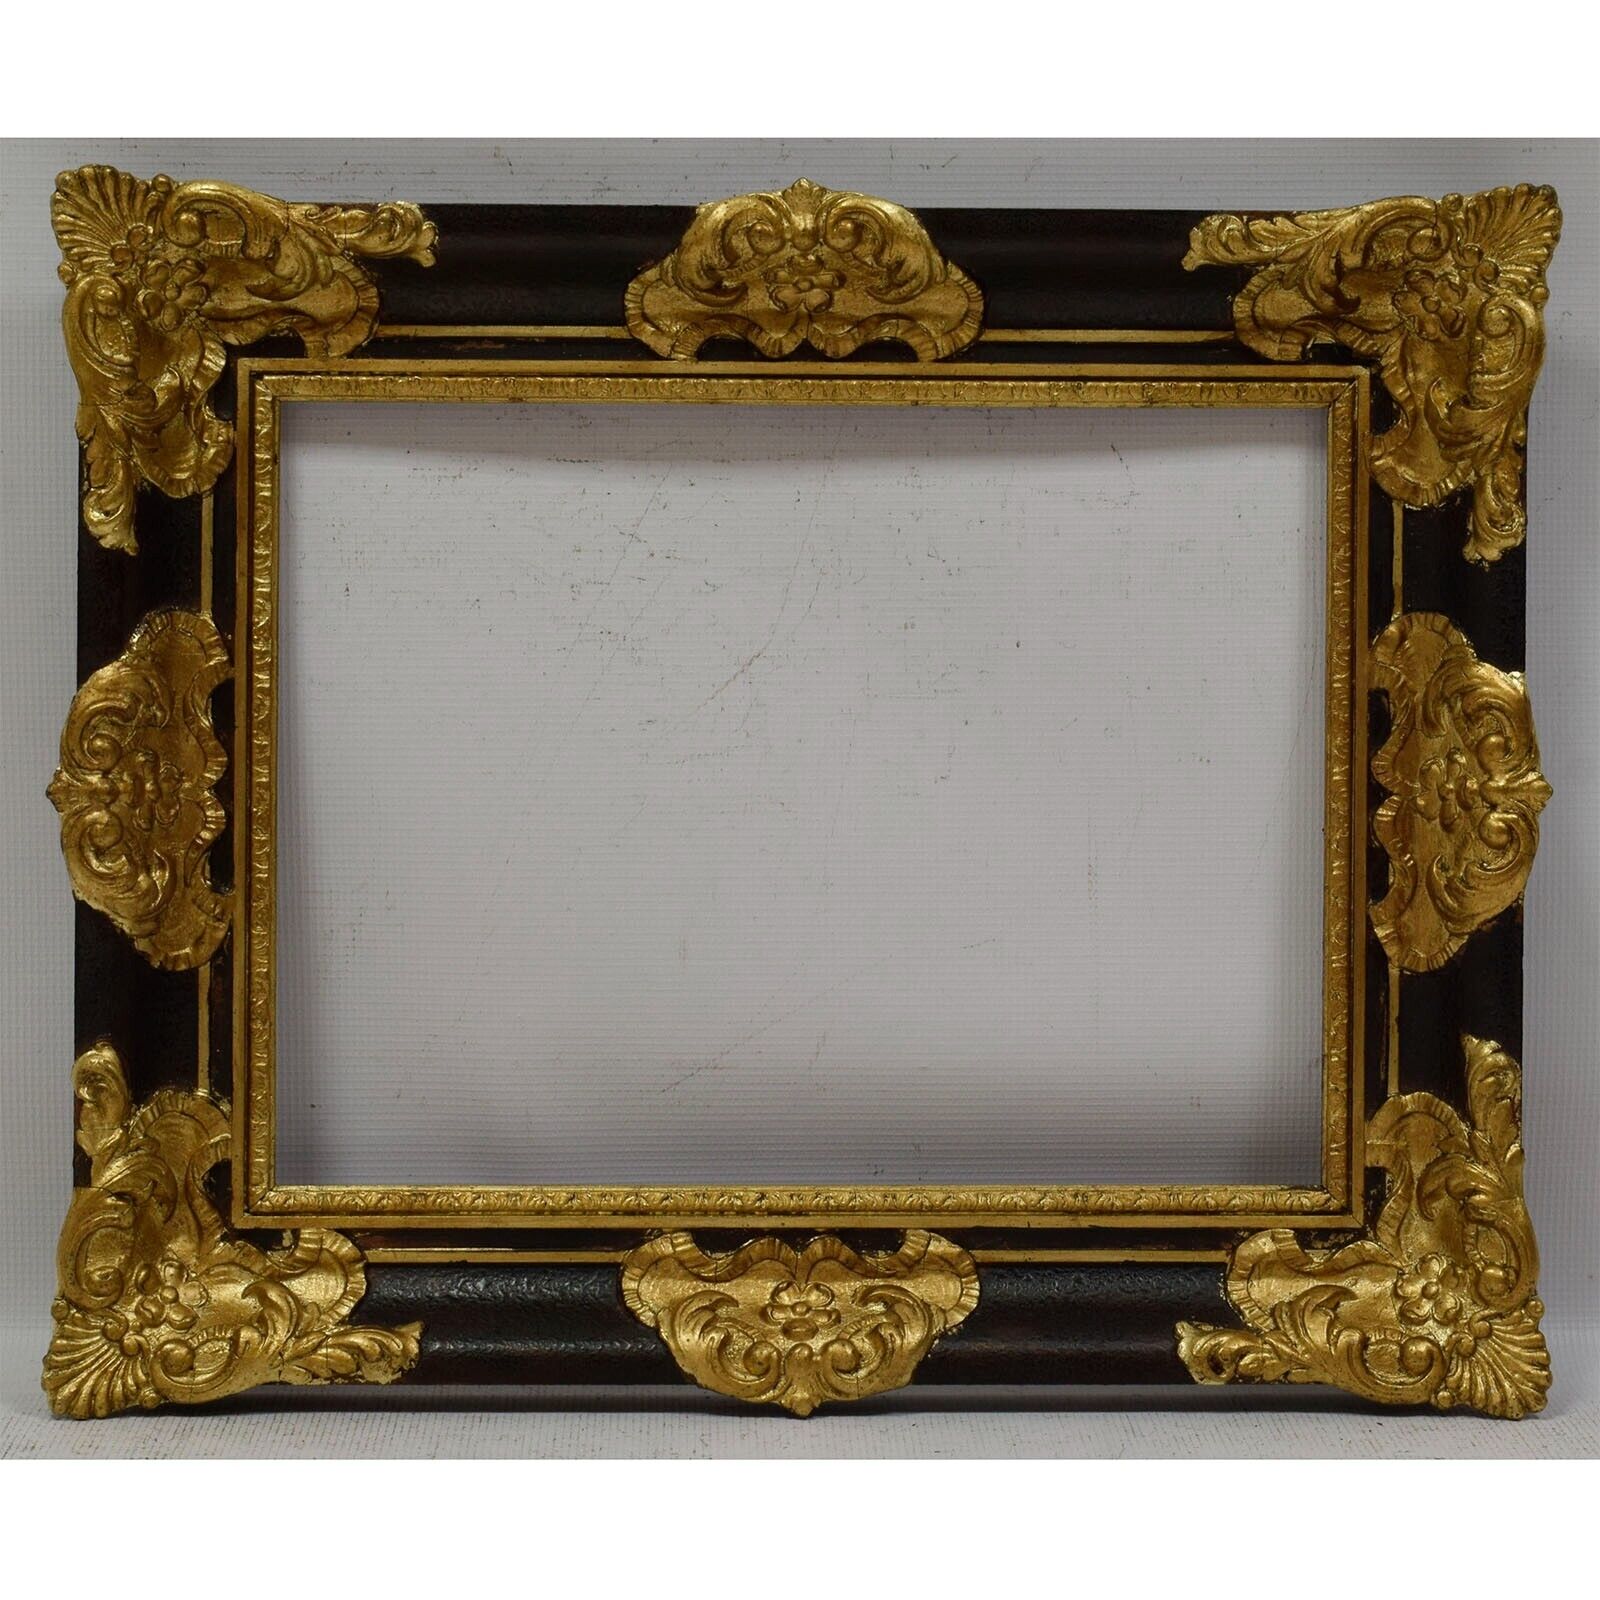 Ca. 1900-1920 Old wooden frame with metal leaf Internal: 16.1x12.2 in